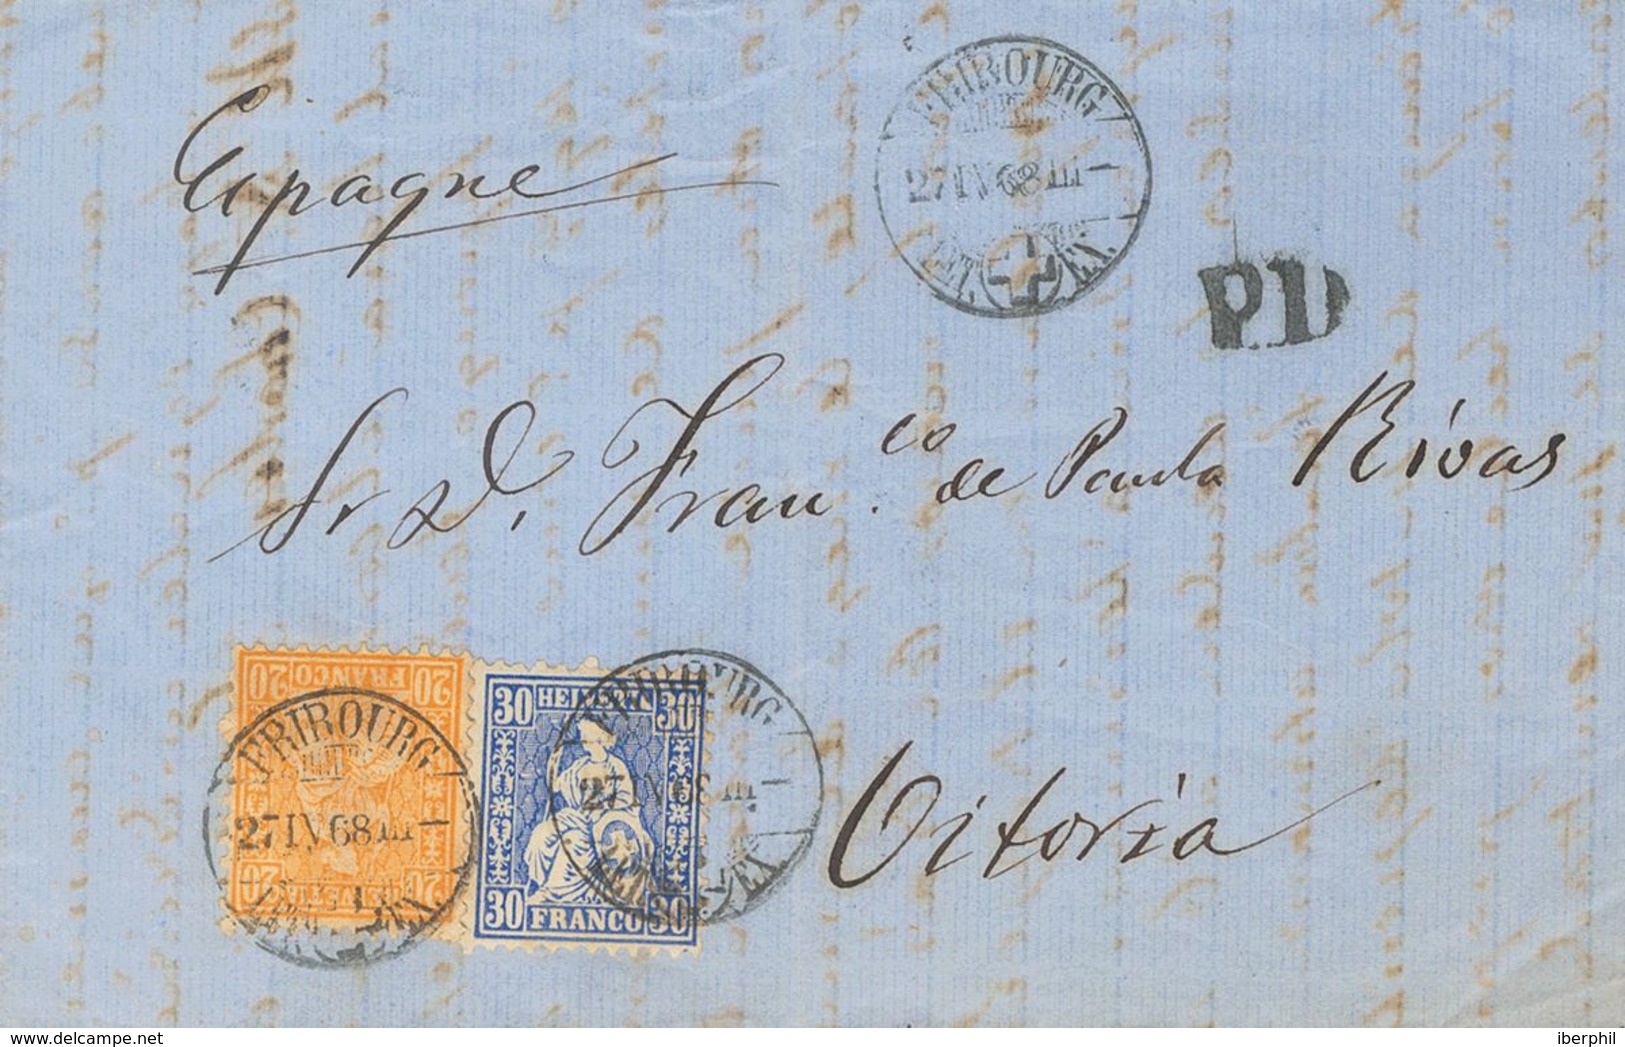 Switzerland. COVERYv 37, 46. 1868. 20 Cts Orange And 30 Cts Ultramarine. FRIBURGO To VITORIA (SPAIN). Date Stamp FRIBOUR - Autres & Non Classés